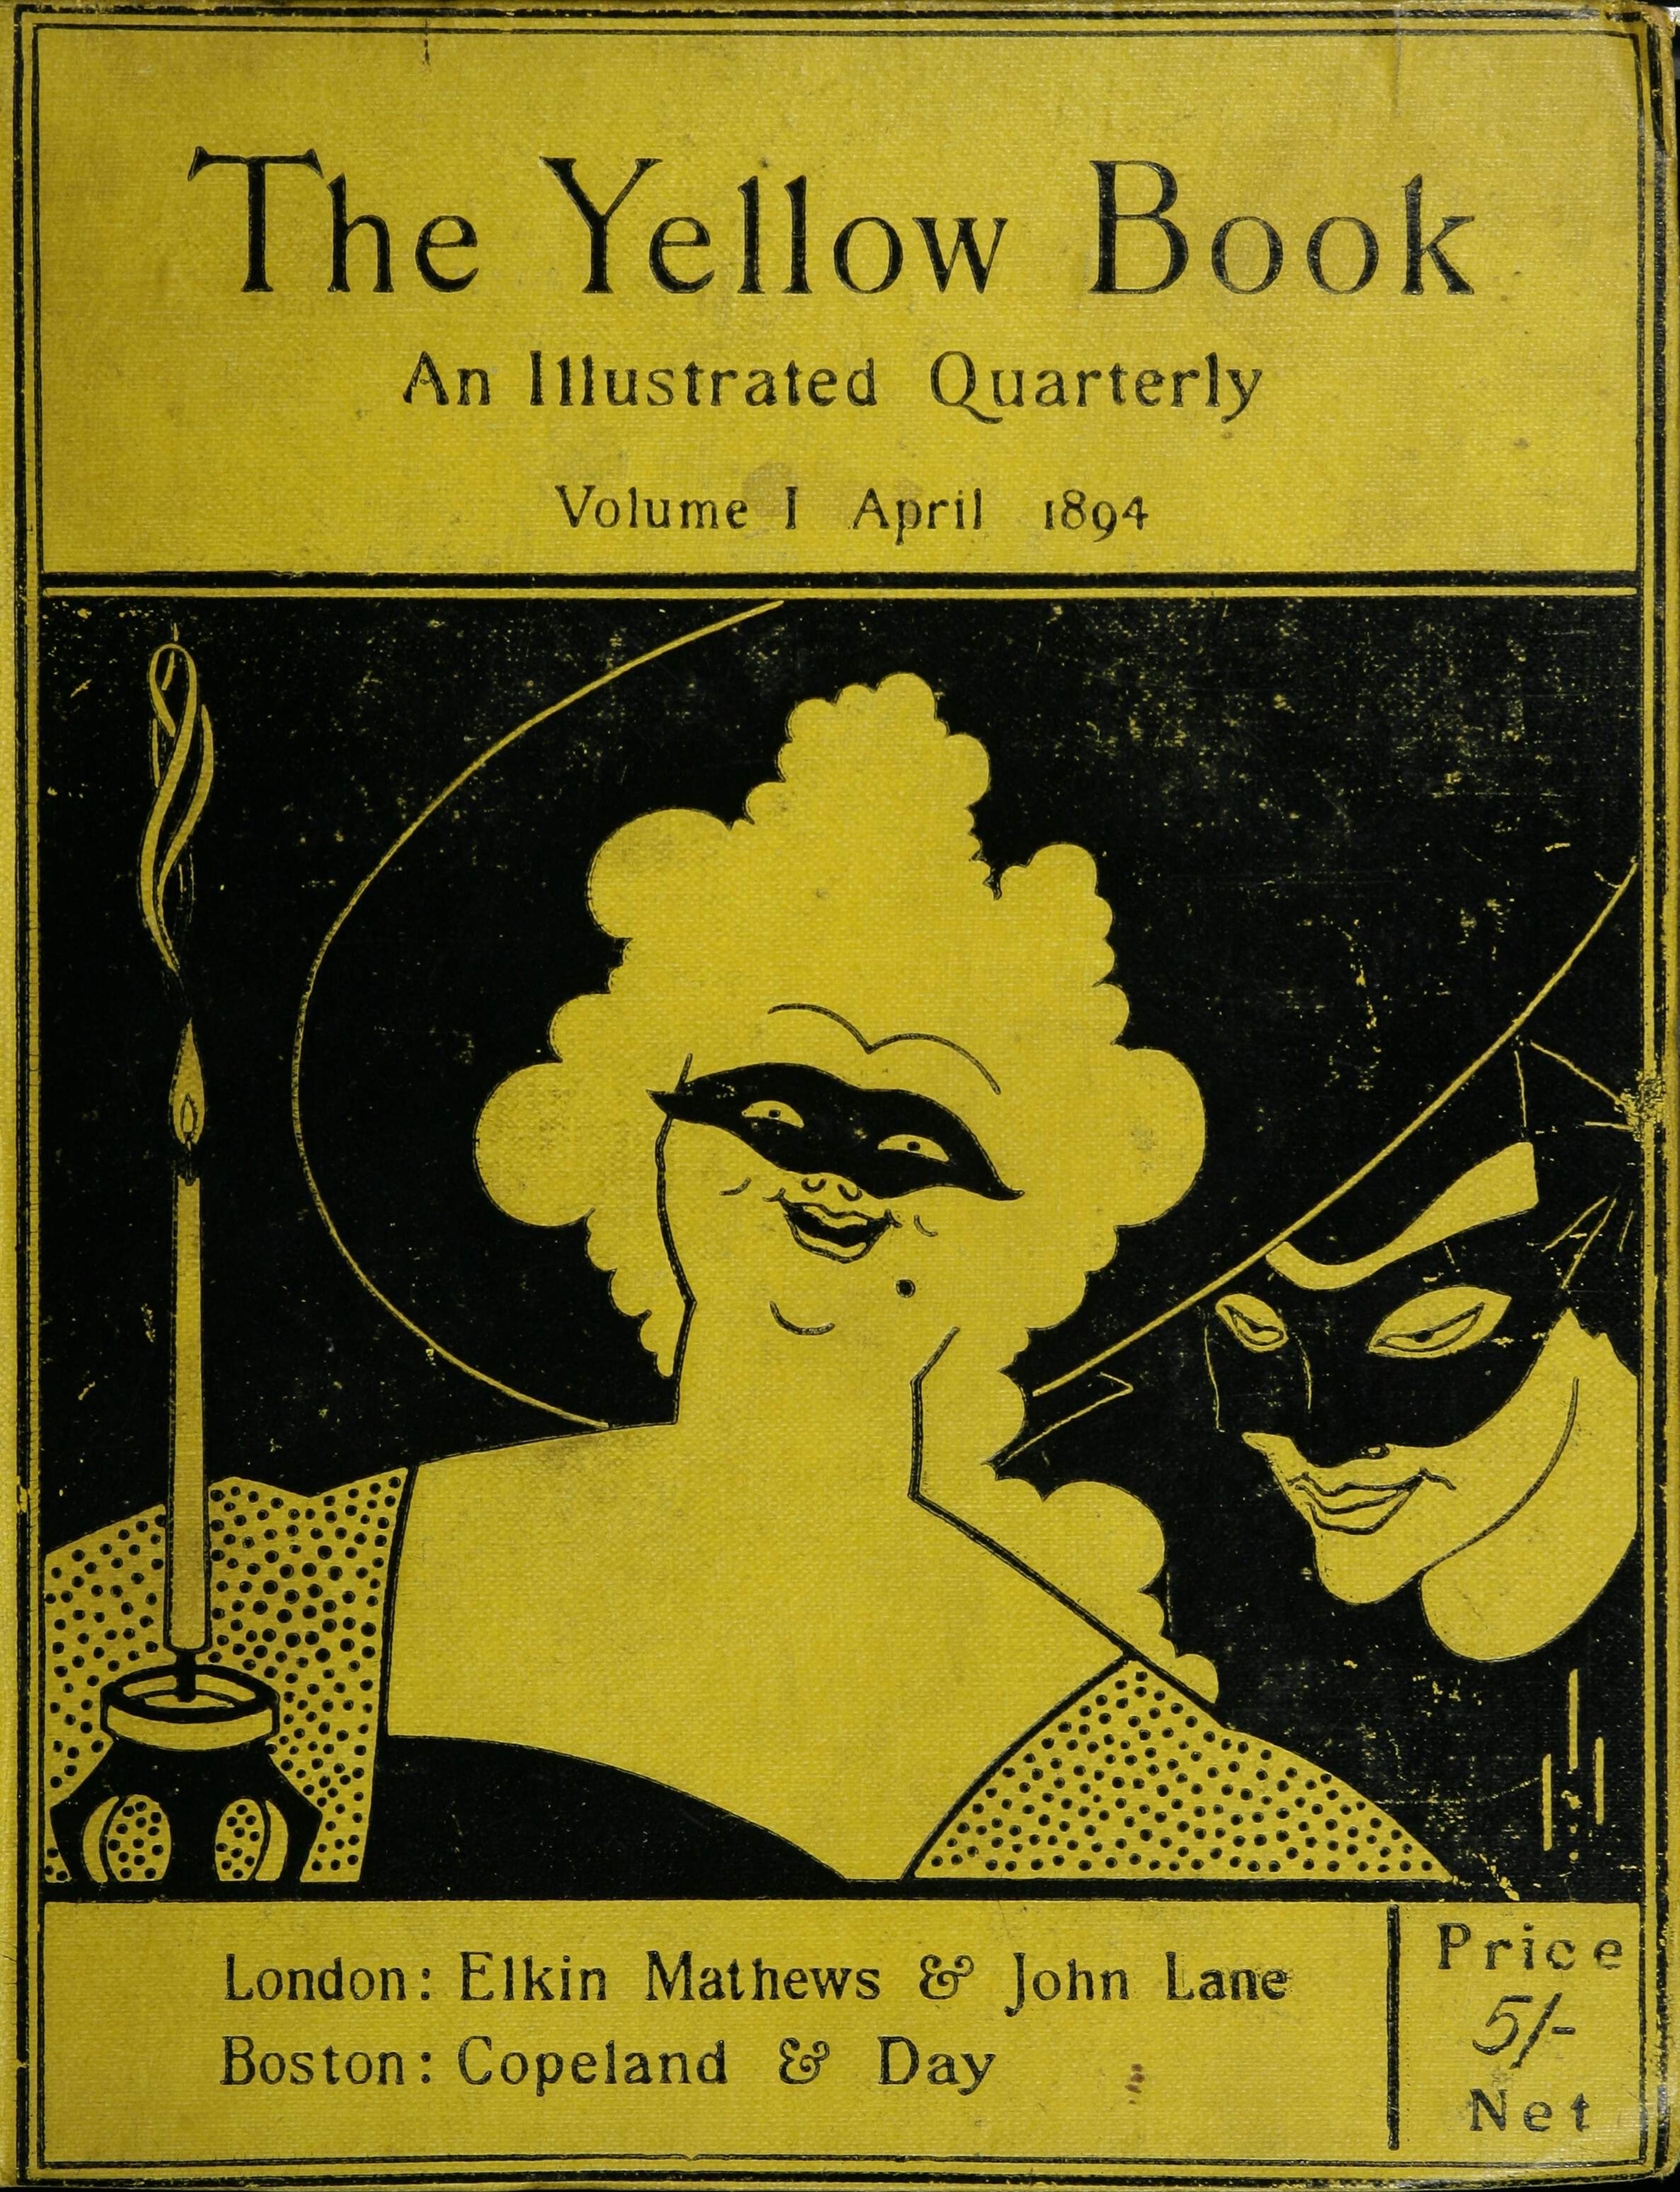 Cover of “The Yellow Book: An Illustrated Quarterly,” Volume I, April 1894, featuring two masked figures and text listing publishers in London and Boston.